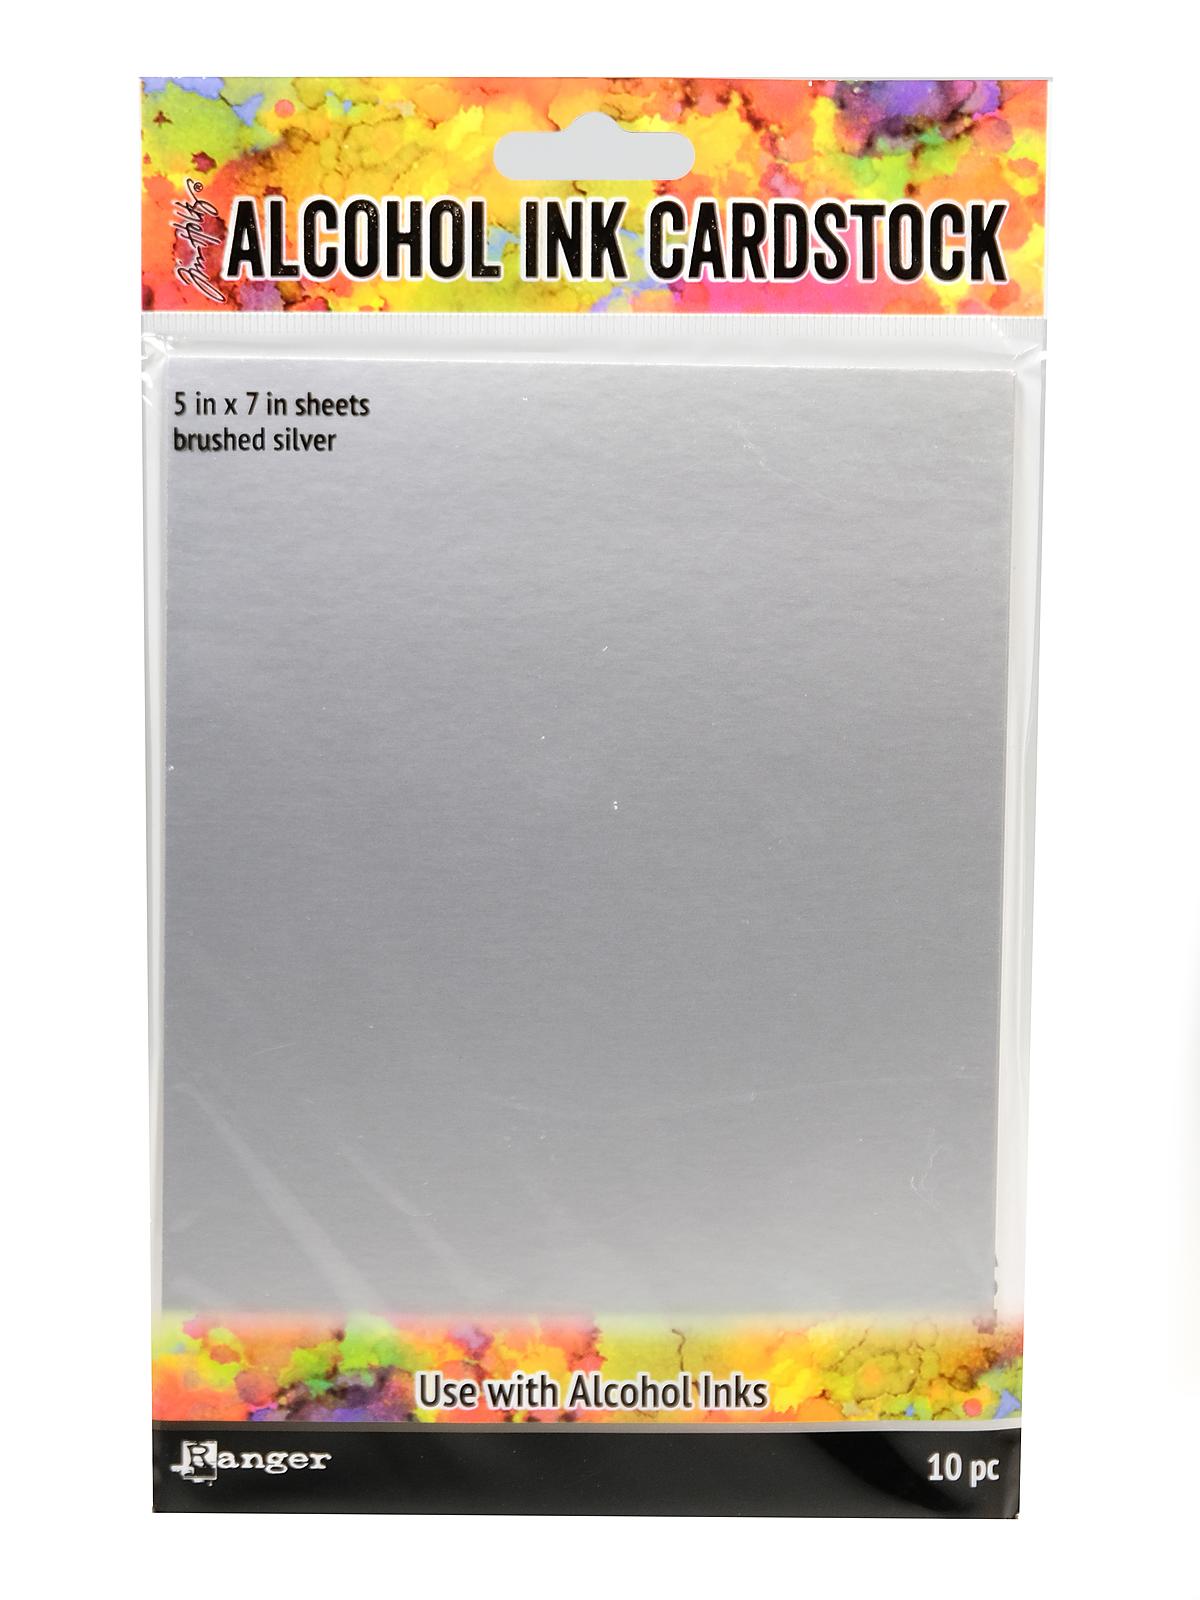 Tim Holtz Alcohol Ink Cardstock Brushed Silver 5 In. X 7 In. Pack Of 10 Sheets